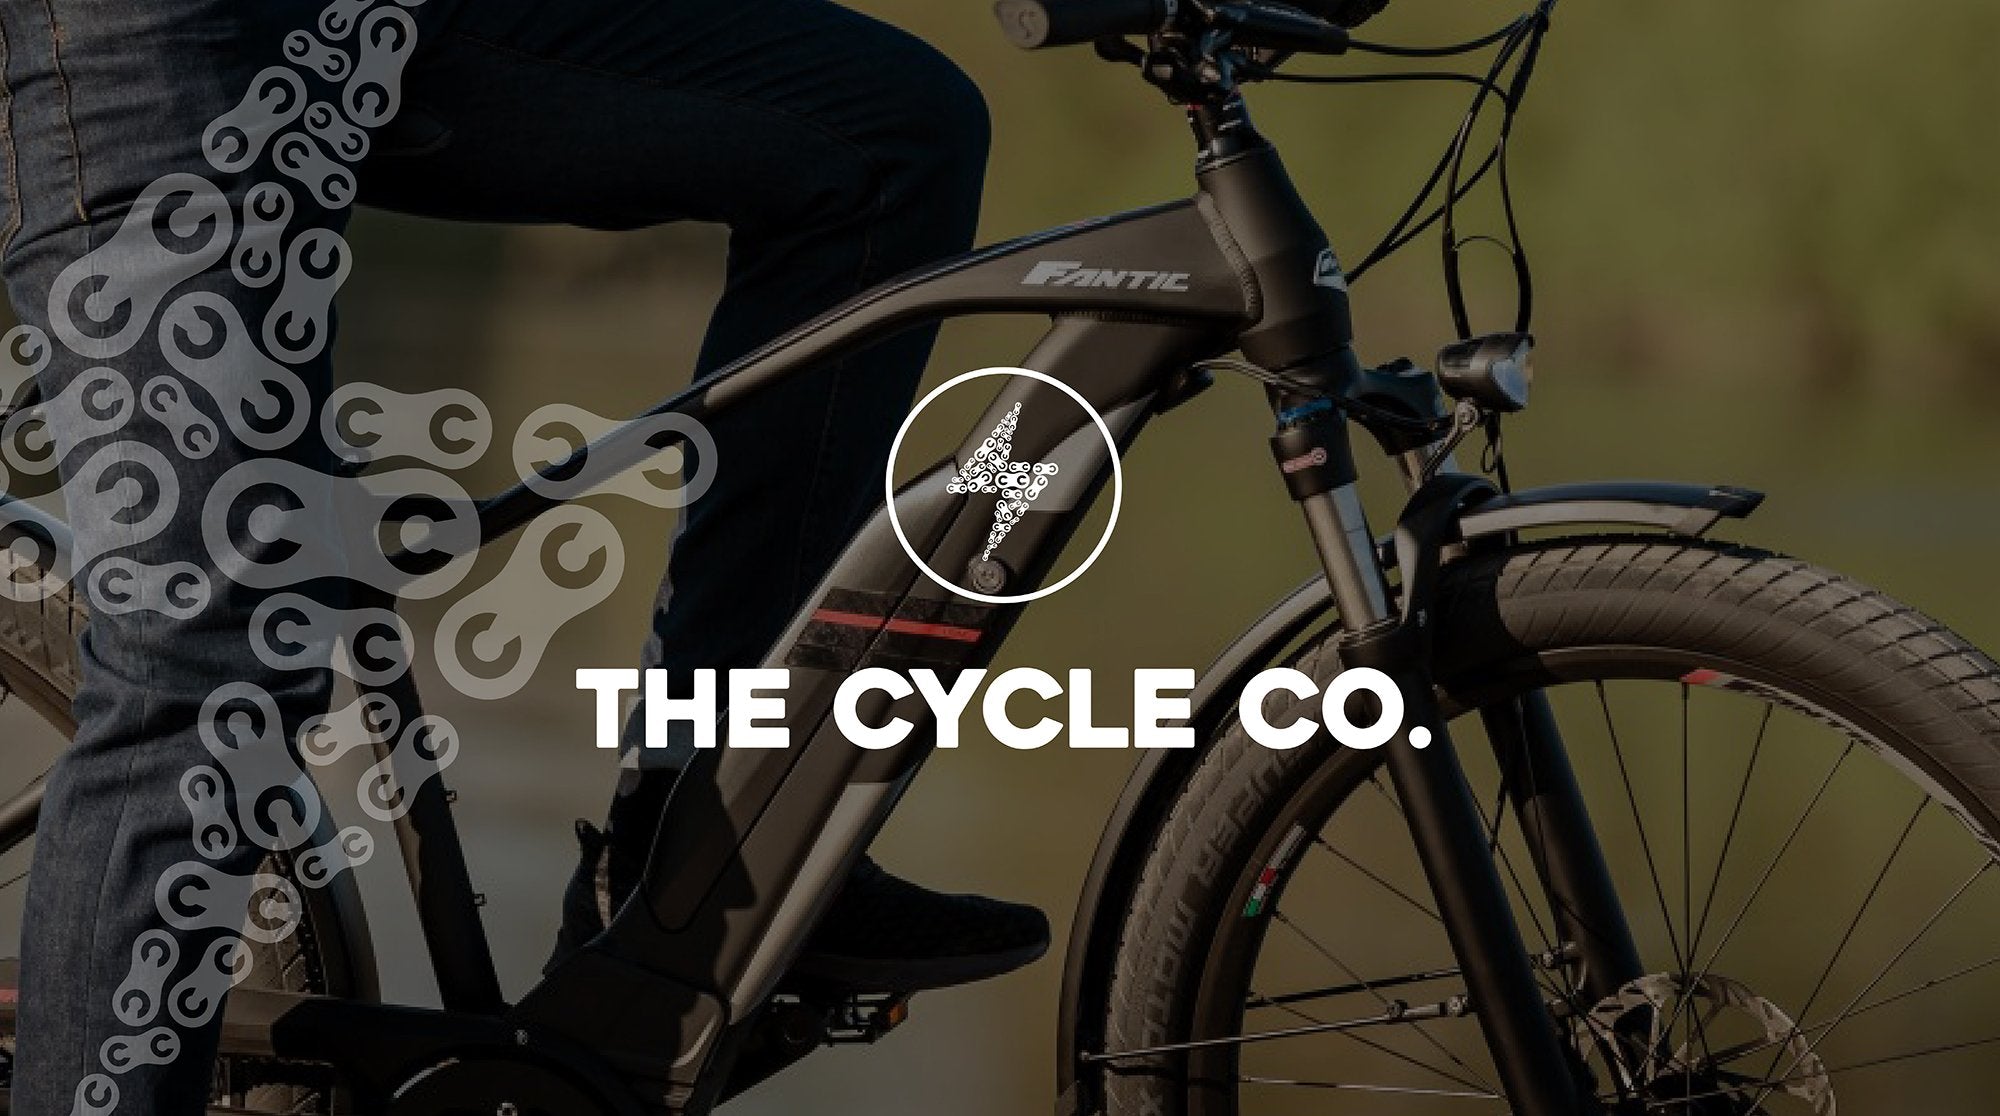 www.thecyclecompany.co.uk